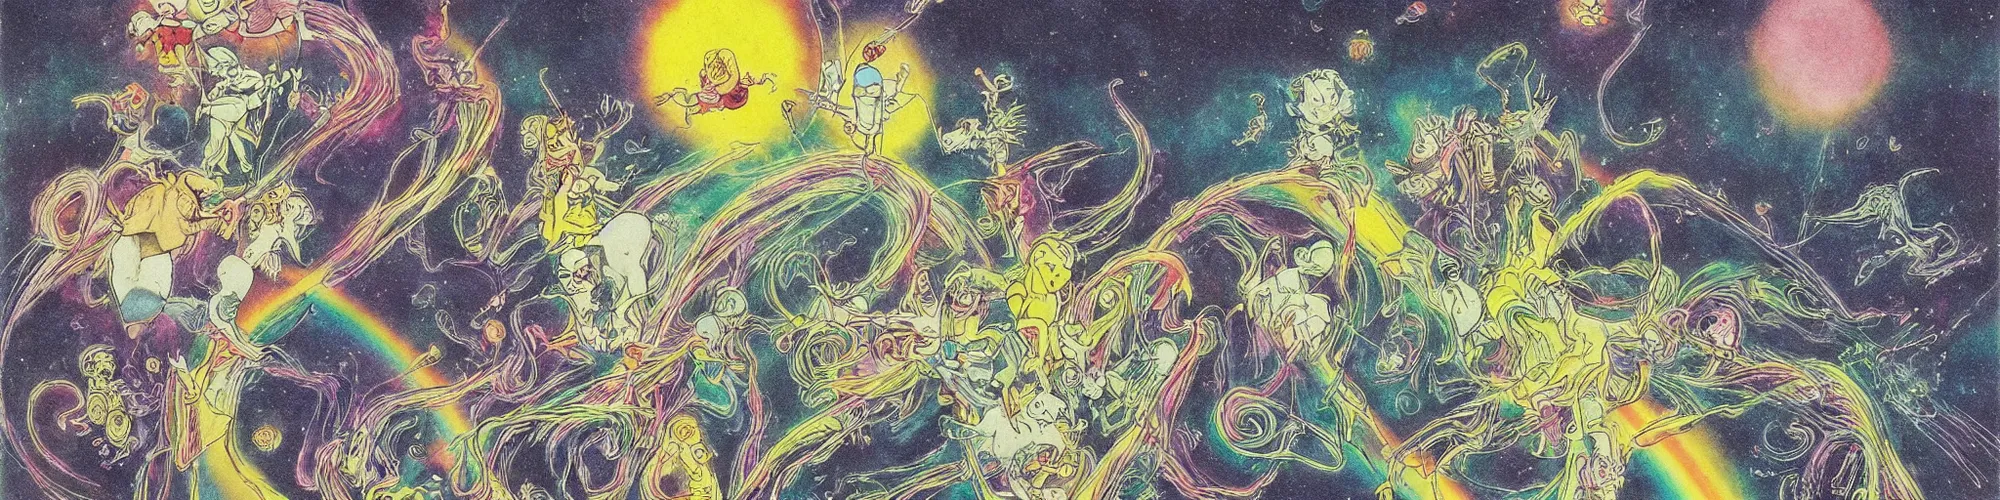 Prompt: dawn of creation ; first atom ; beings of light and darkness ; ethereal plane. vibrant rainbow colors. homer simpson. illustrated by maurice sendak, stephen gammell, junji ito, dr seuss, tsutomu nihei, keith thompson, graham ingels